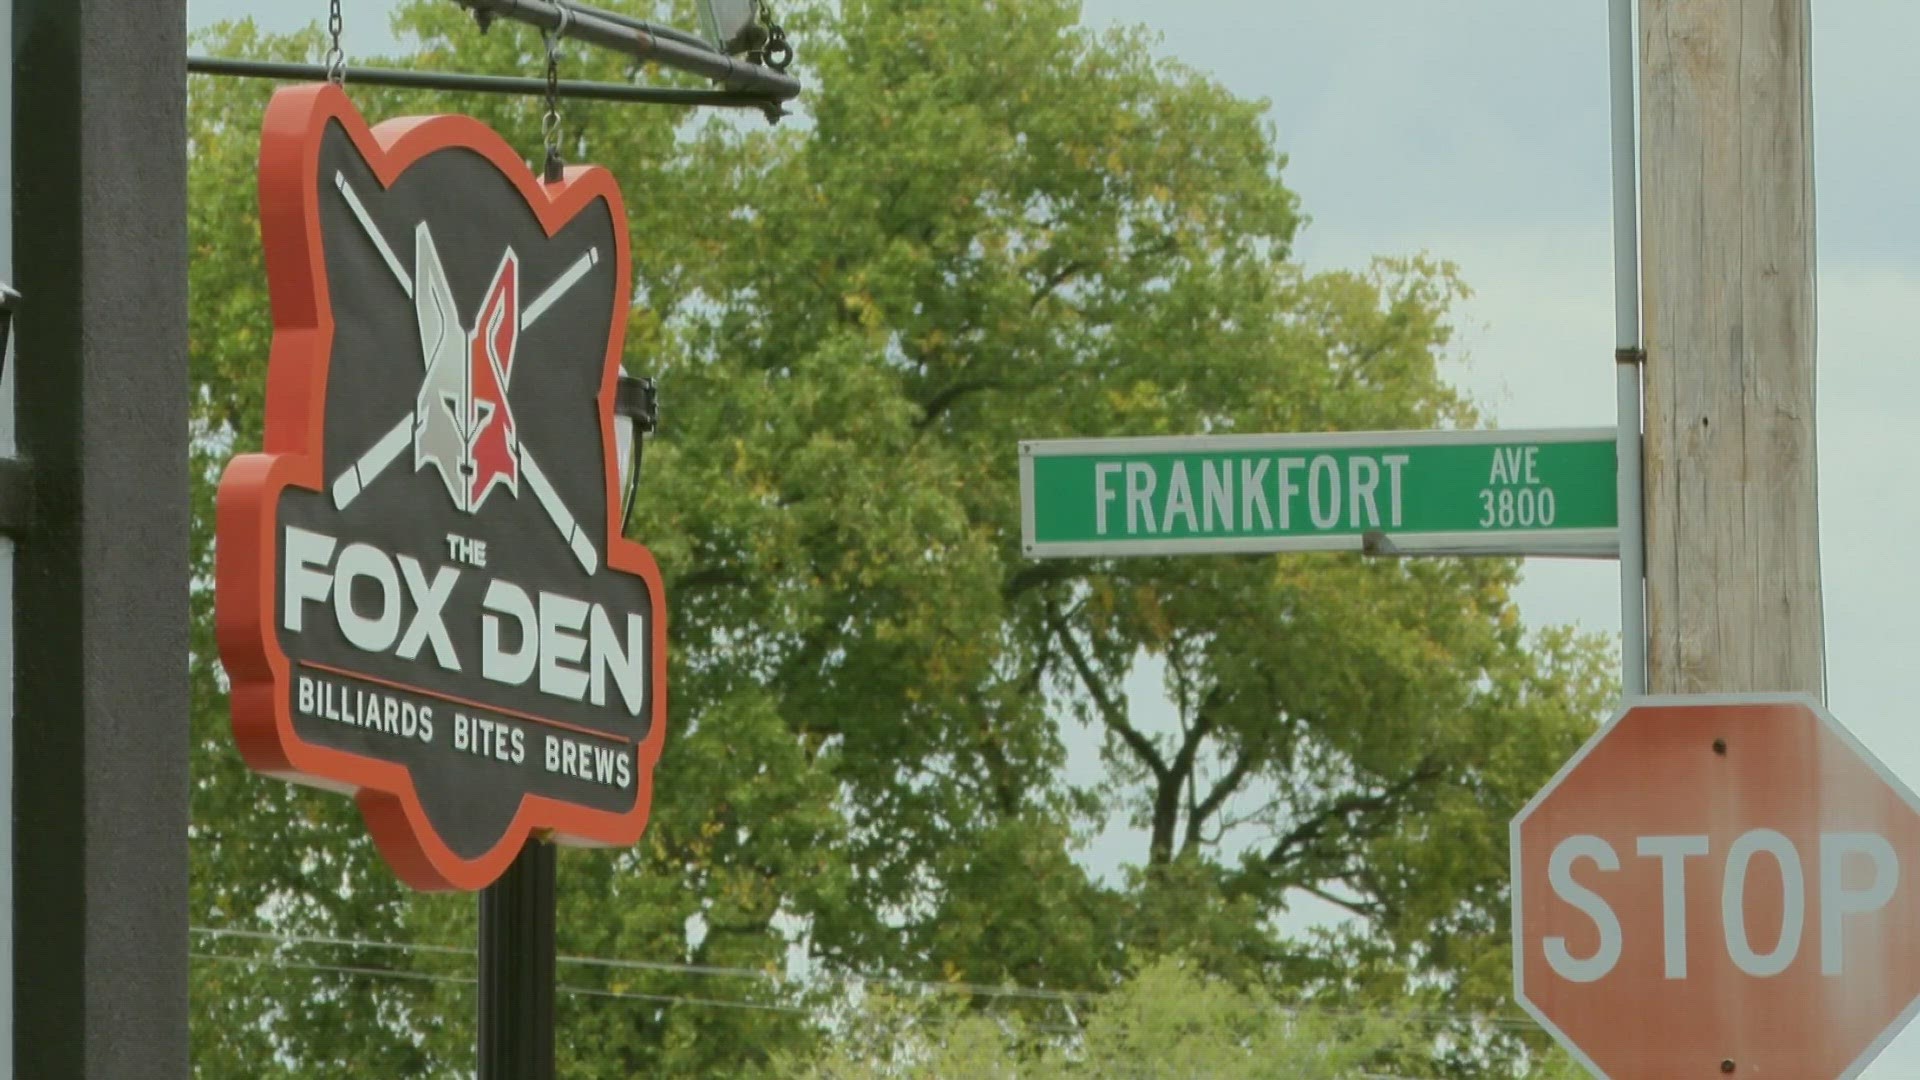 Less than a week after a fatal shooting at The Fox Den. The bar's owner is taking new safety precautions.